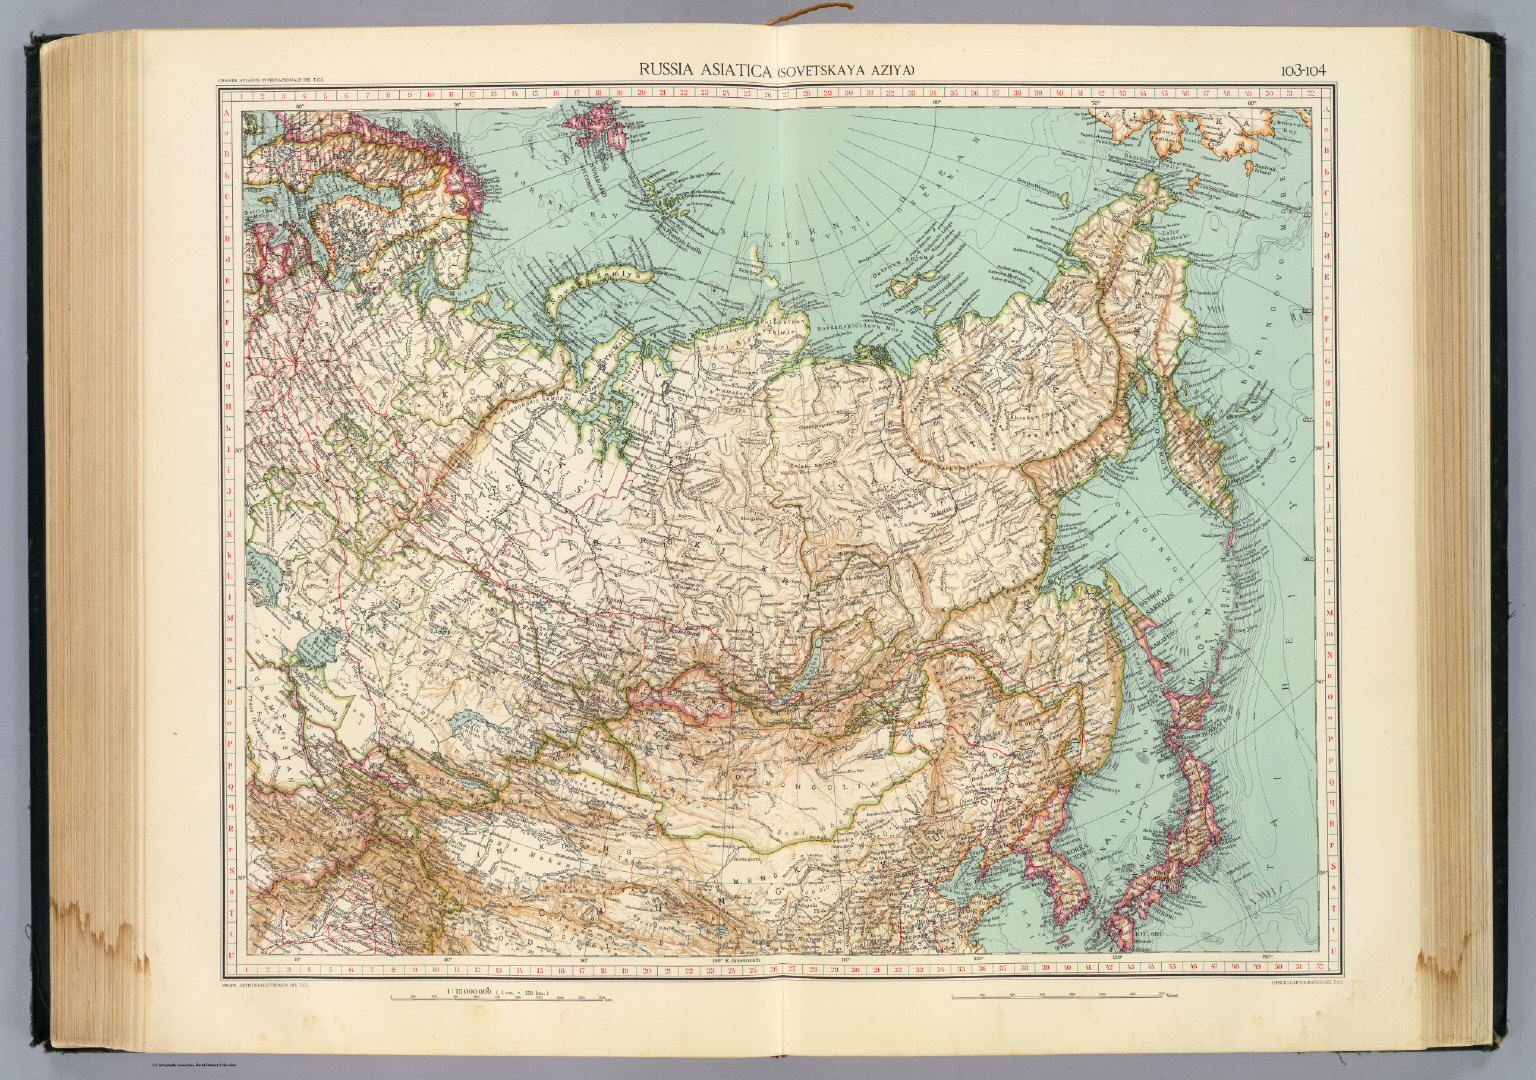 103-04. Russia Asiatica. - David Rumsey Historical Map Collection